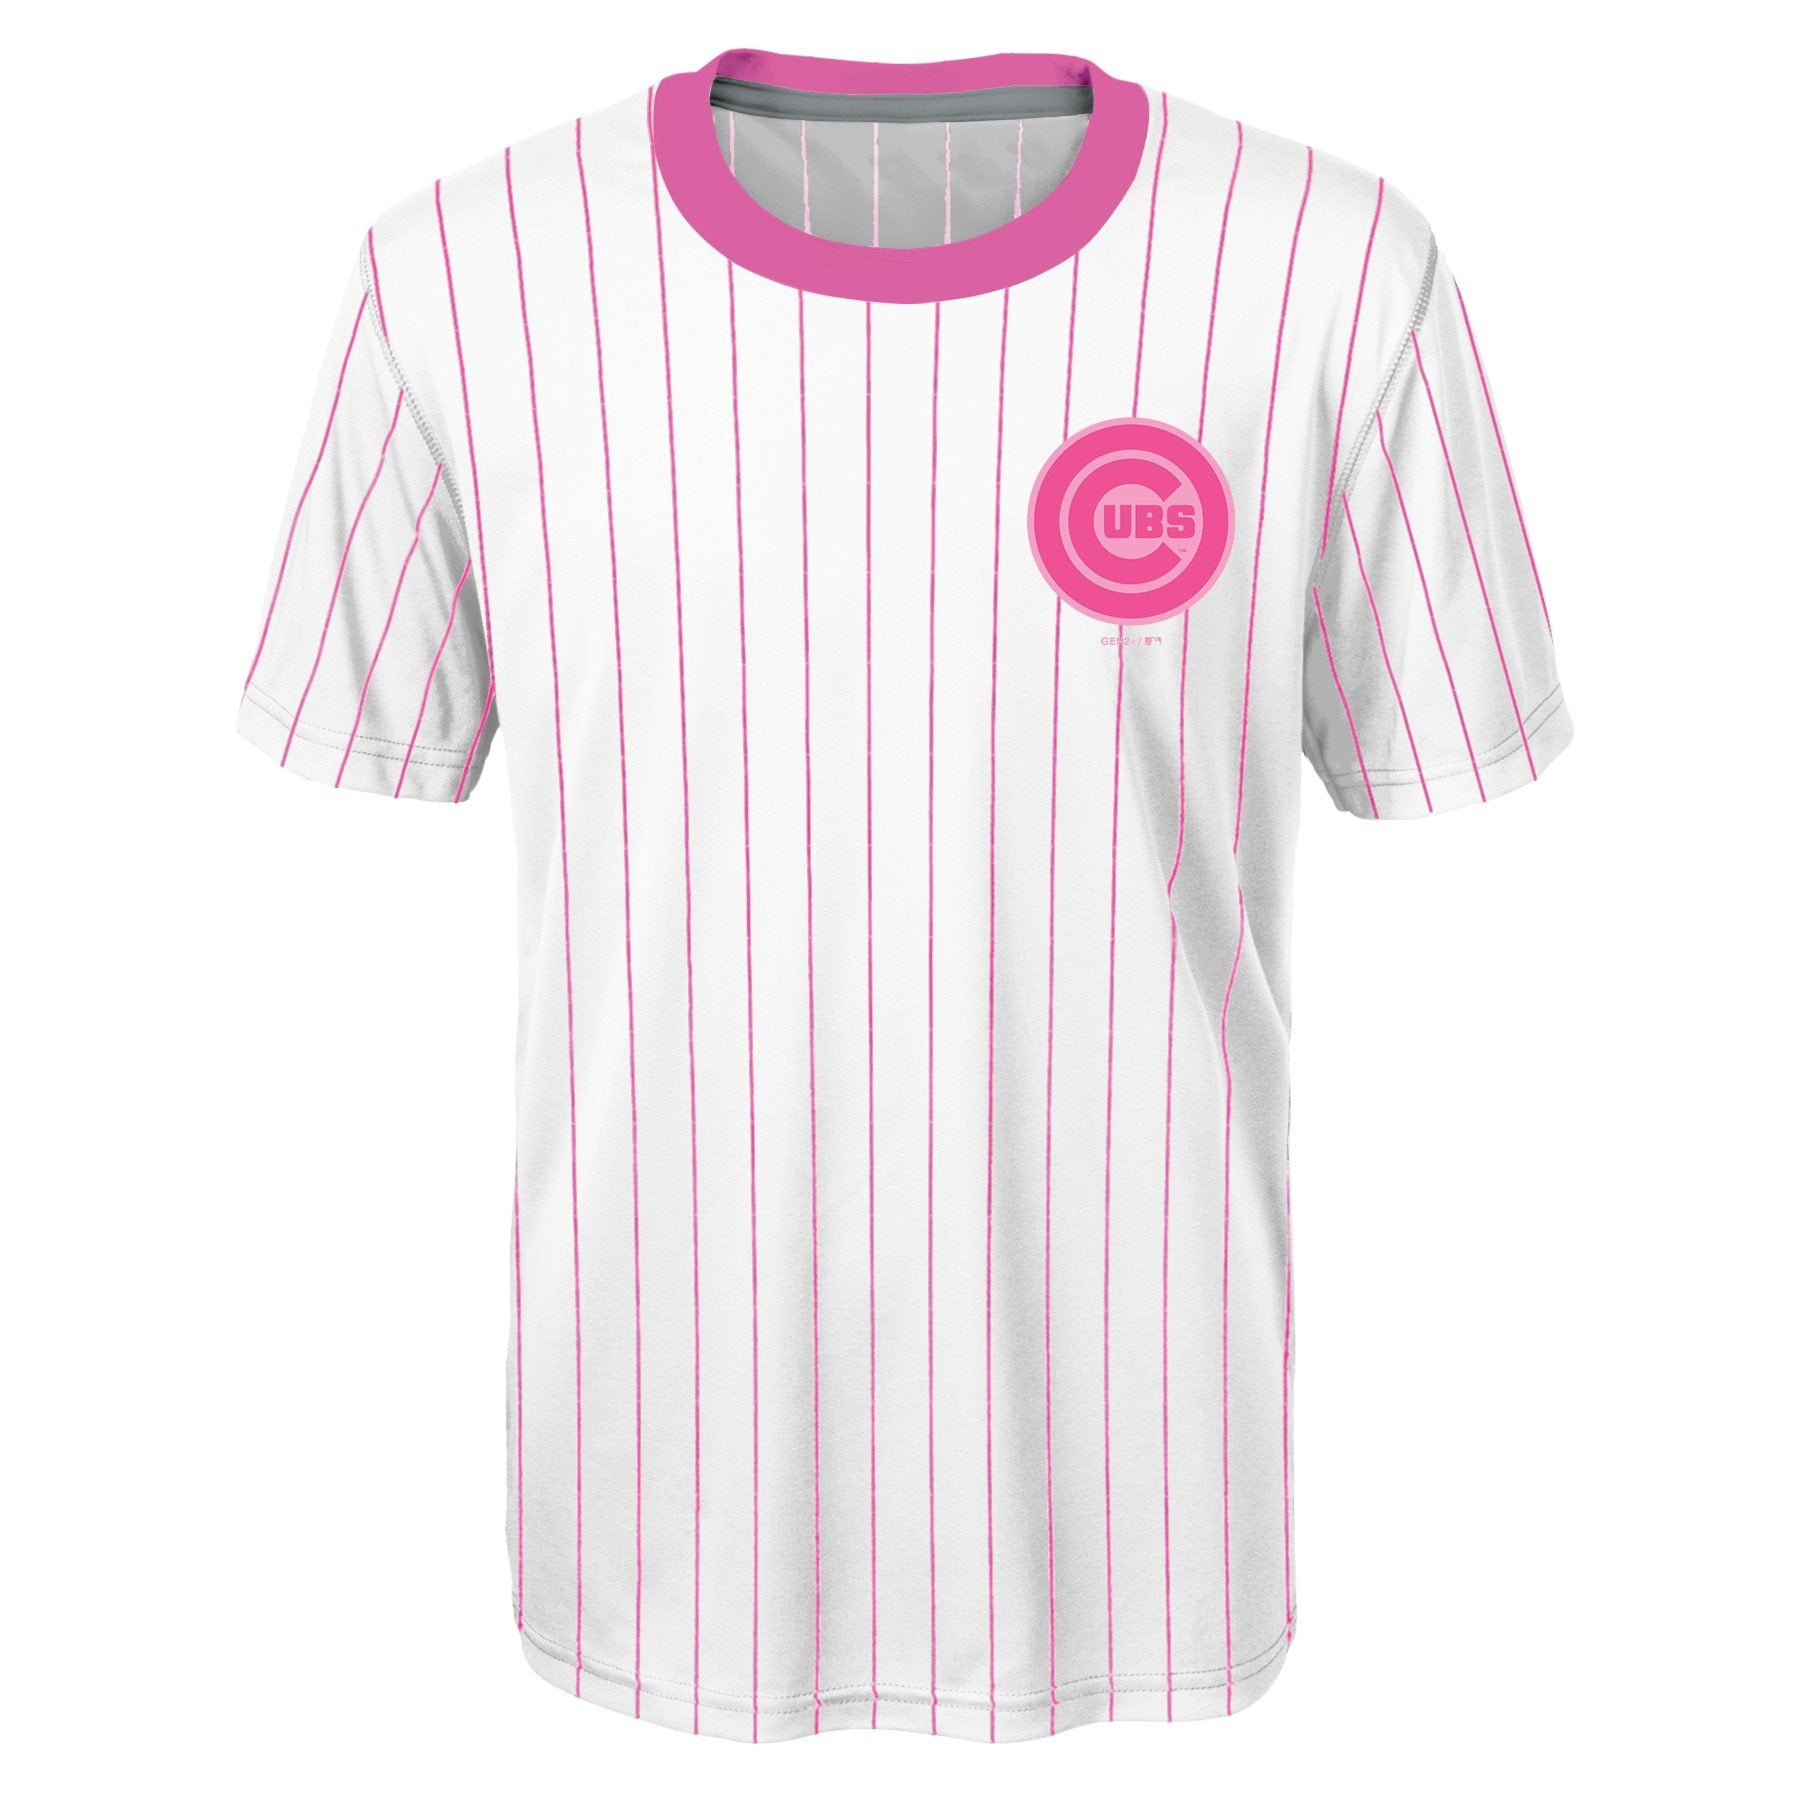 Outer Stuff Chicago Cubs Nike Youth Pink Pinstripe Performance Tee XL